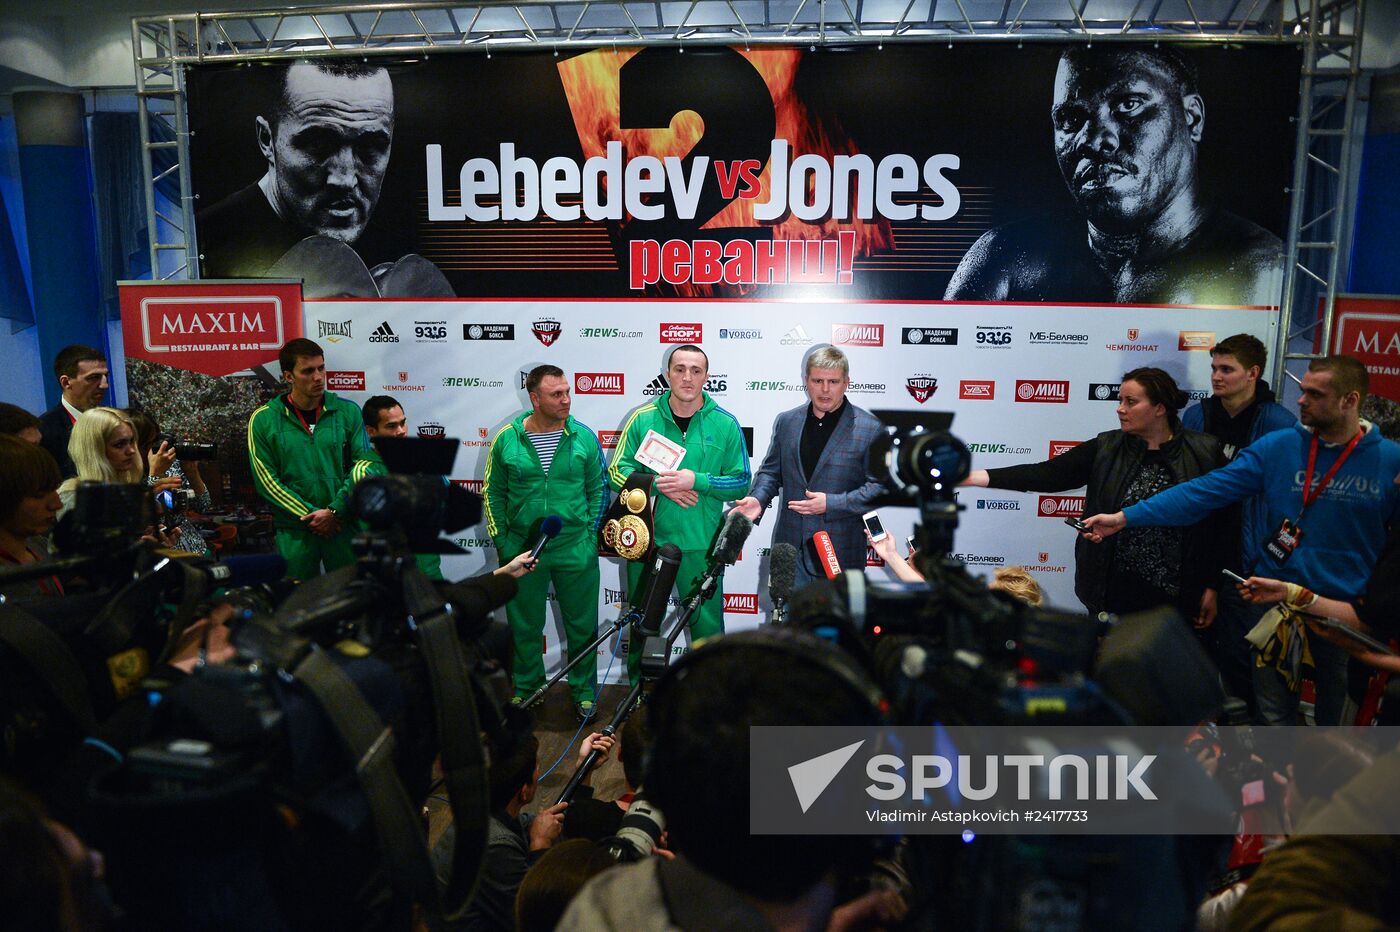 Match between Denis Lebedev and Guillermo Jones cancelled